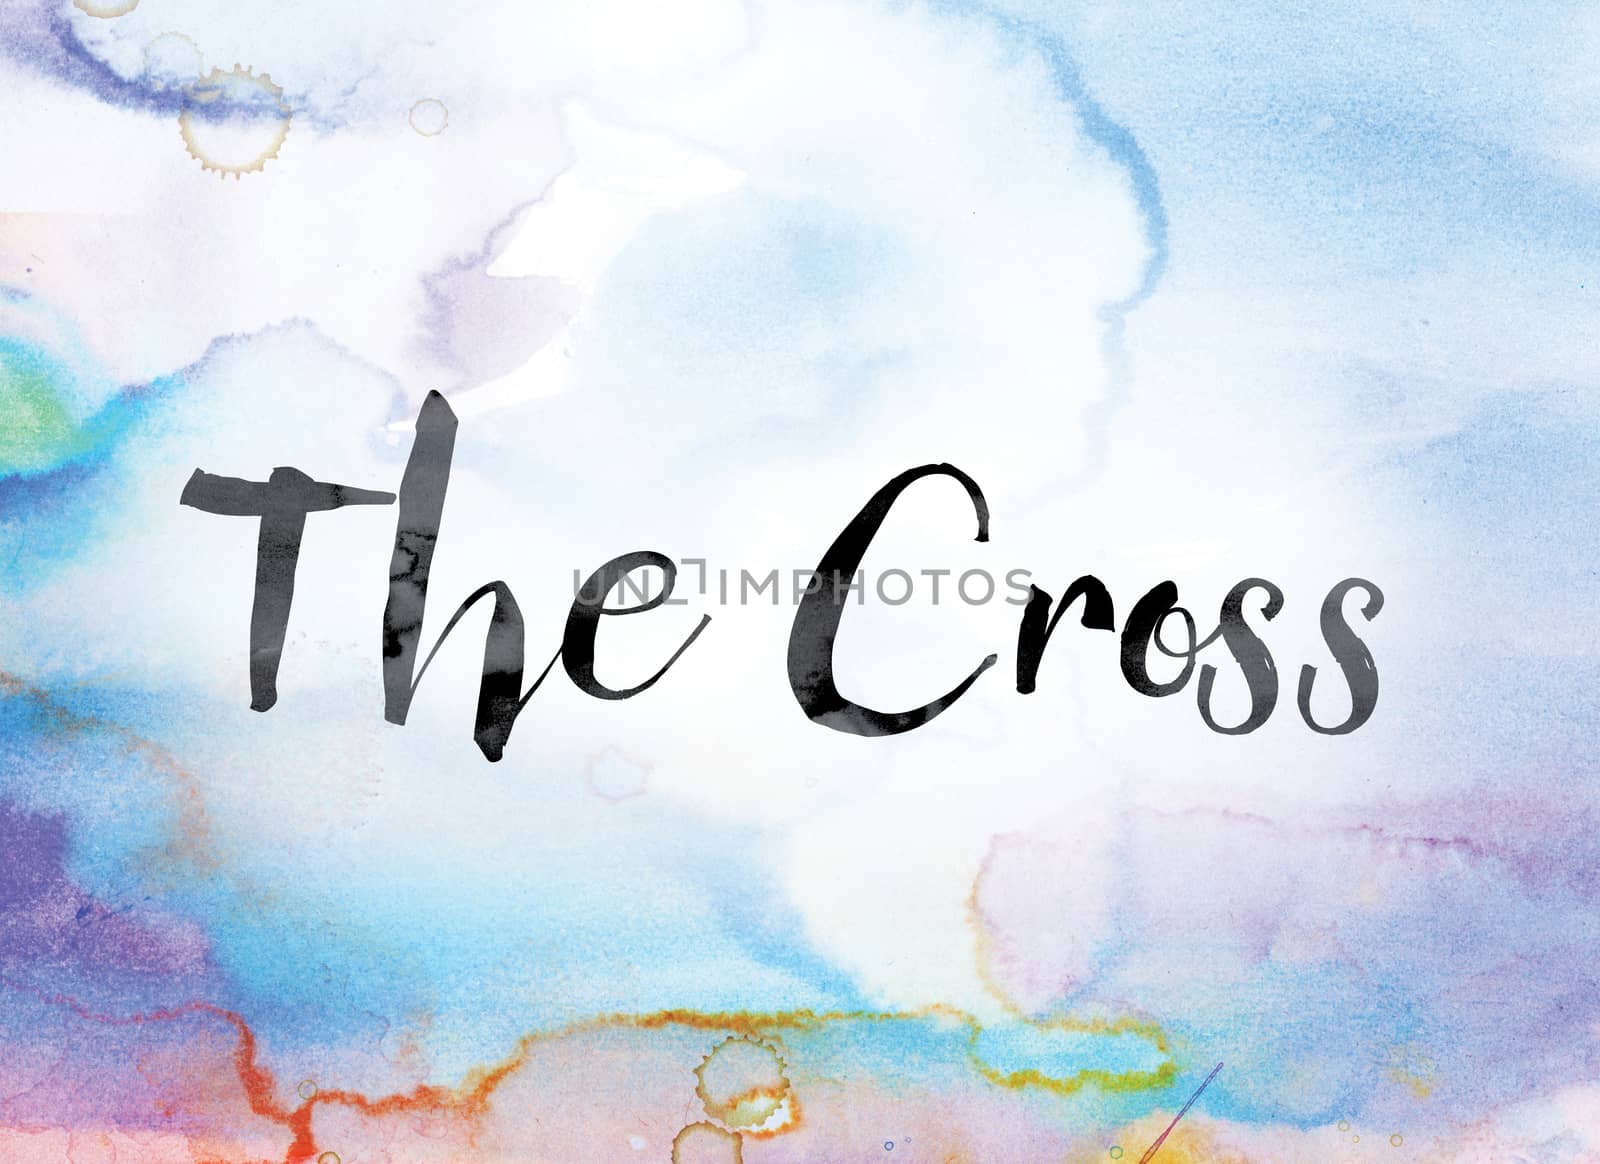 The word "The Cross" painted in black ink over a colorful watercolor washed background concept and theme.